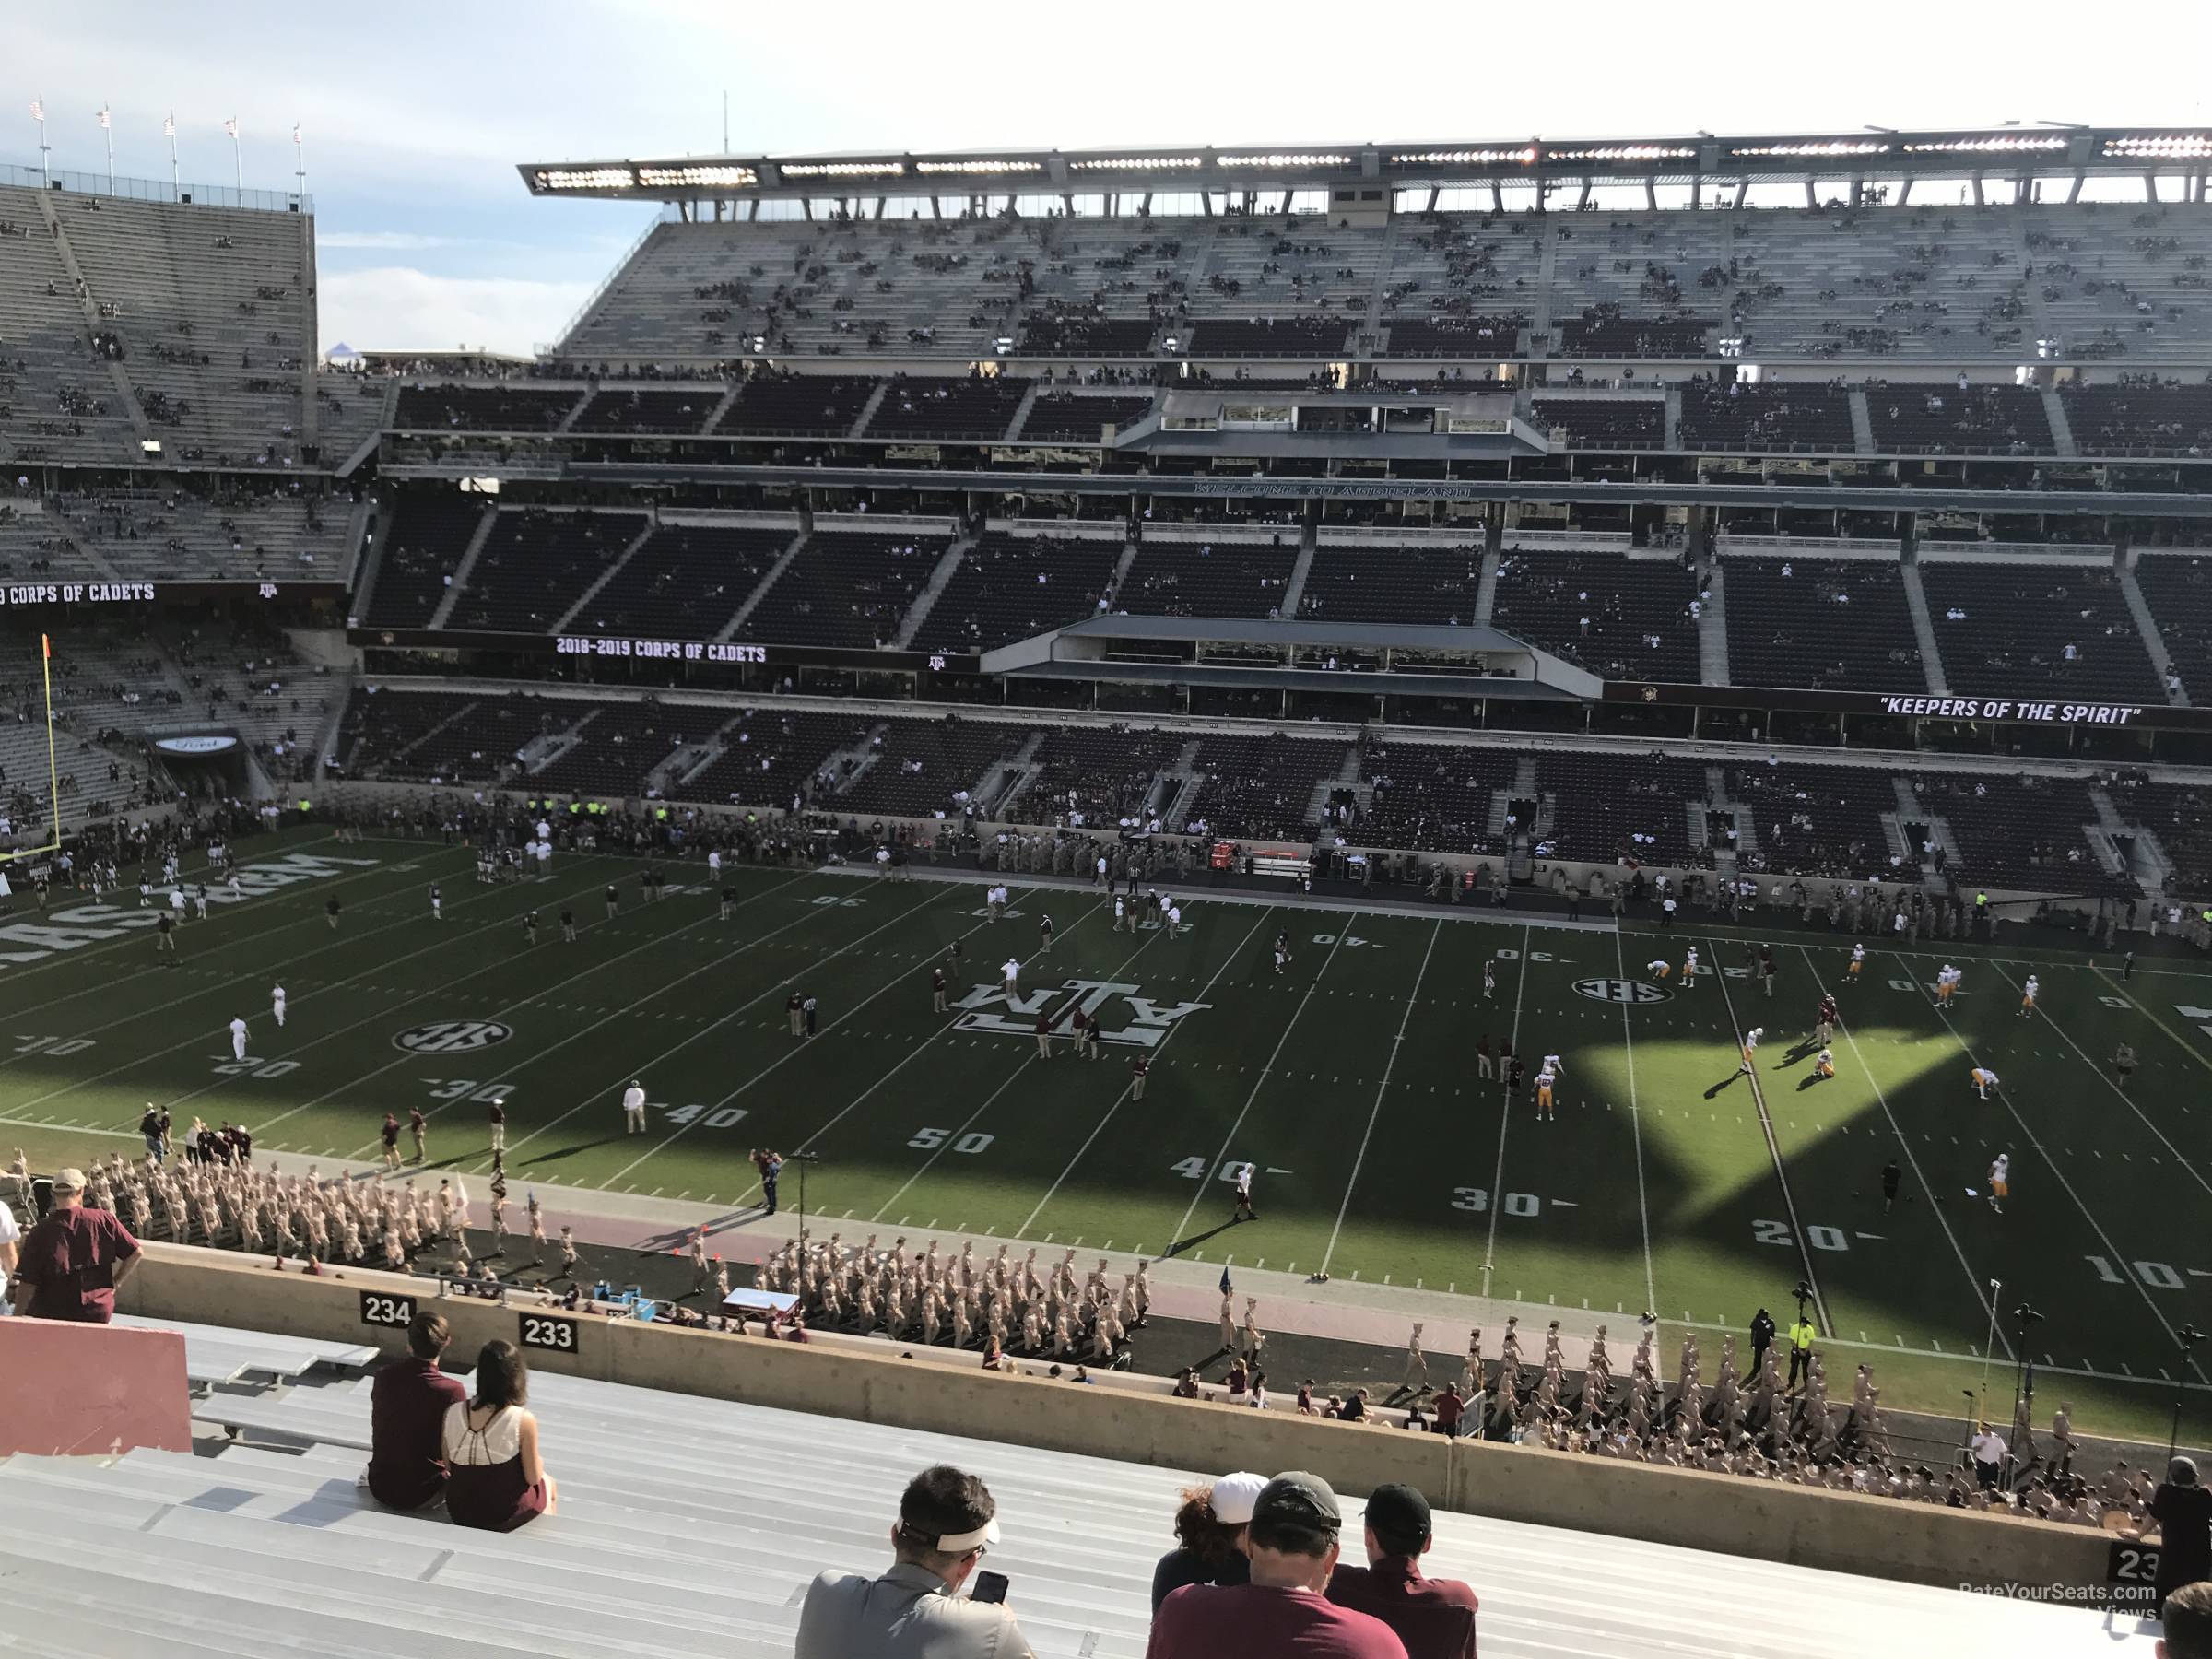 section 233, row 20 seat view  - kyle field